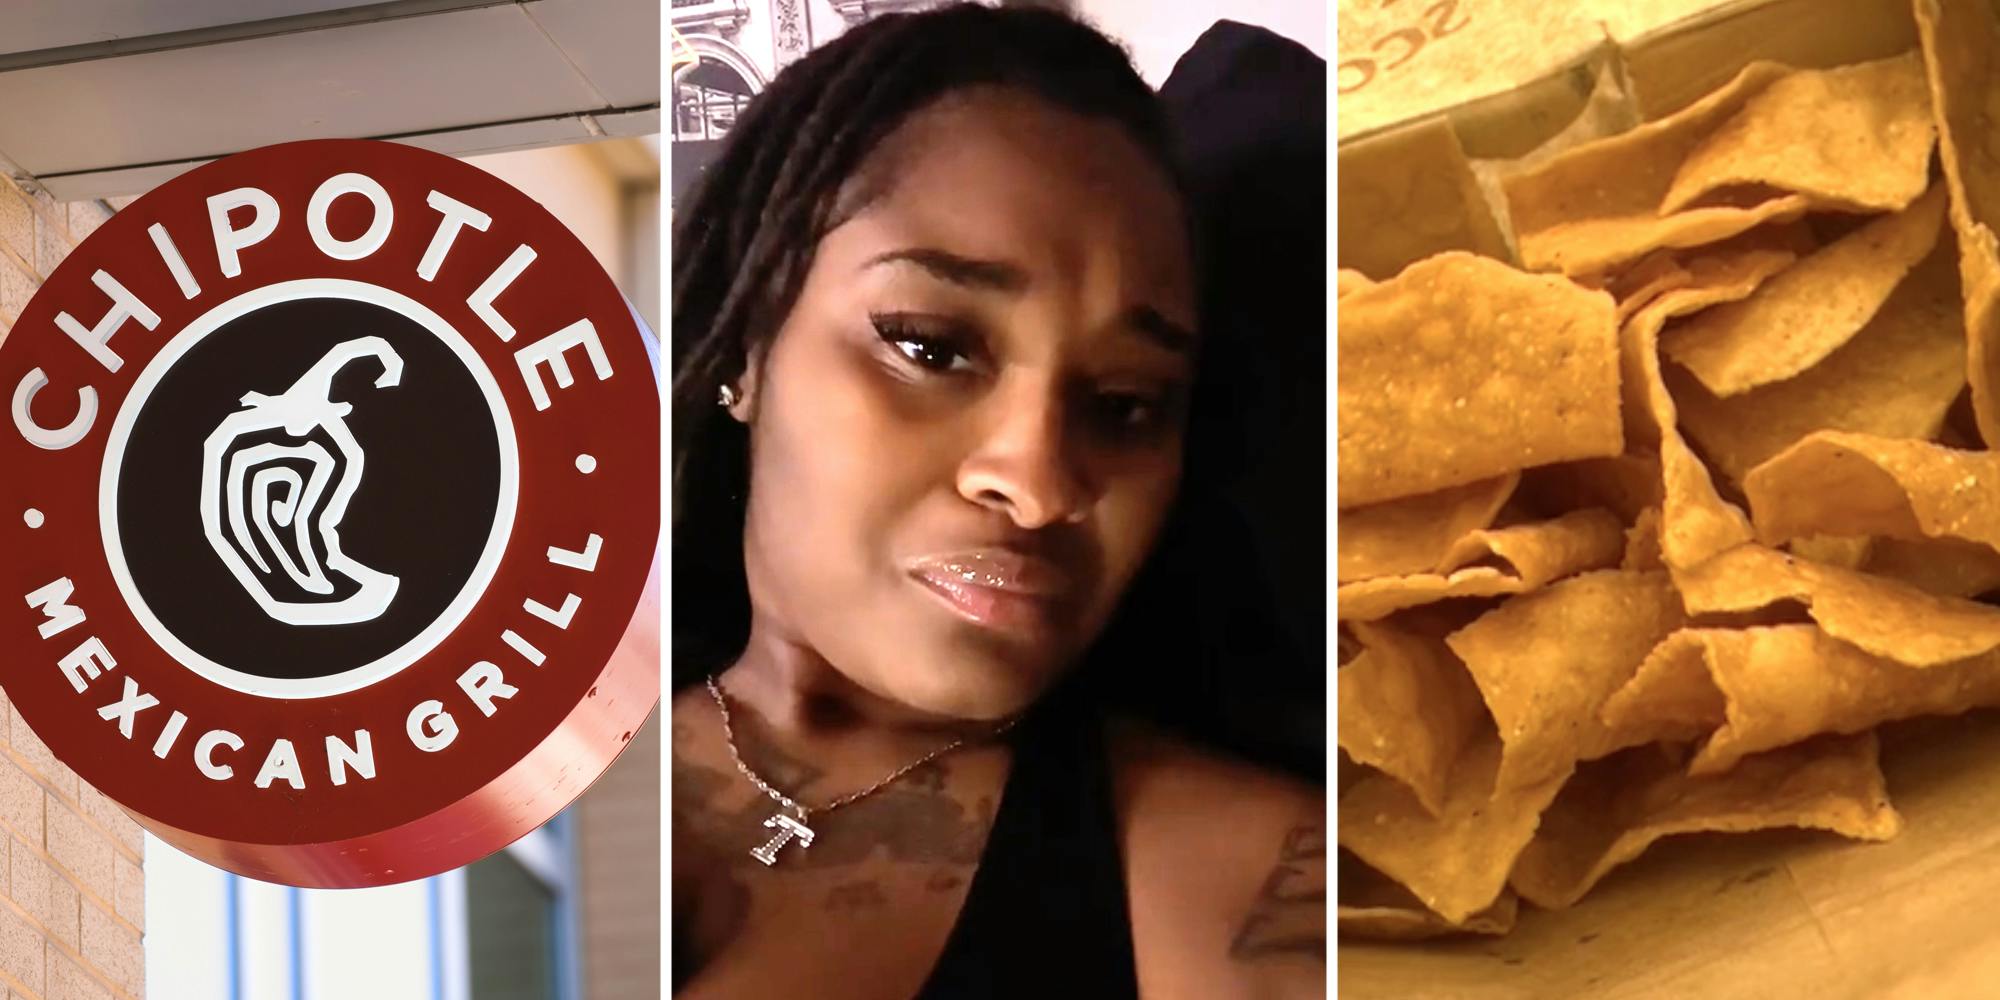 ‘Chipotle has been scamming us’: Customer slams Chipotle after receiving ‘large’ bag of chips